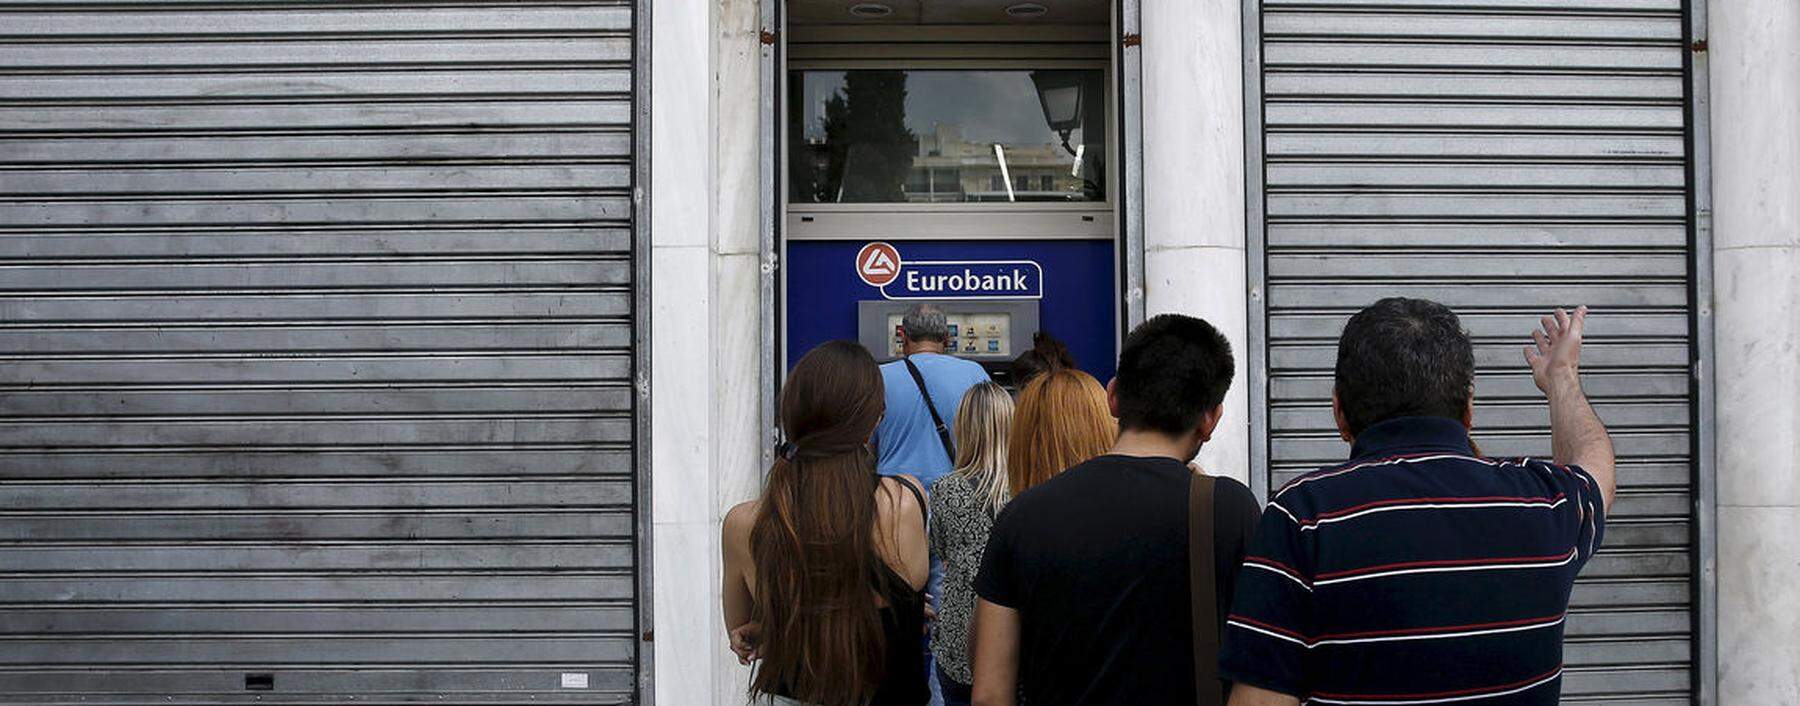 File photo of a man reacting as people line up to withdraw cash from an ATM outside a Eurobank branch in Athens